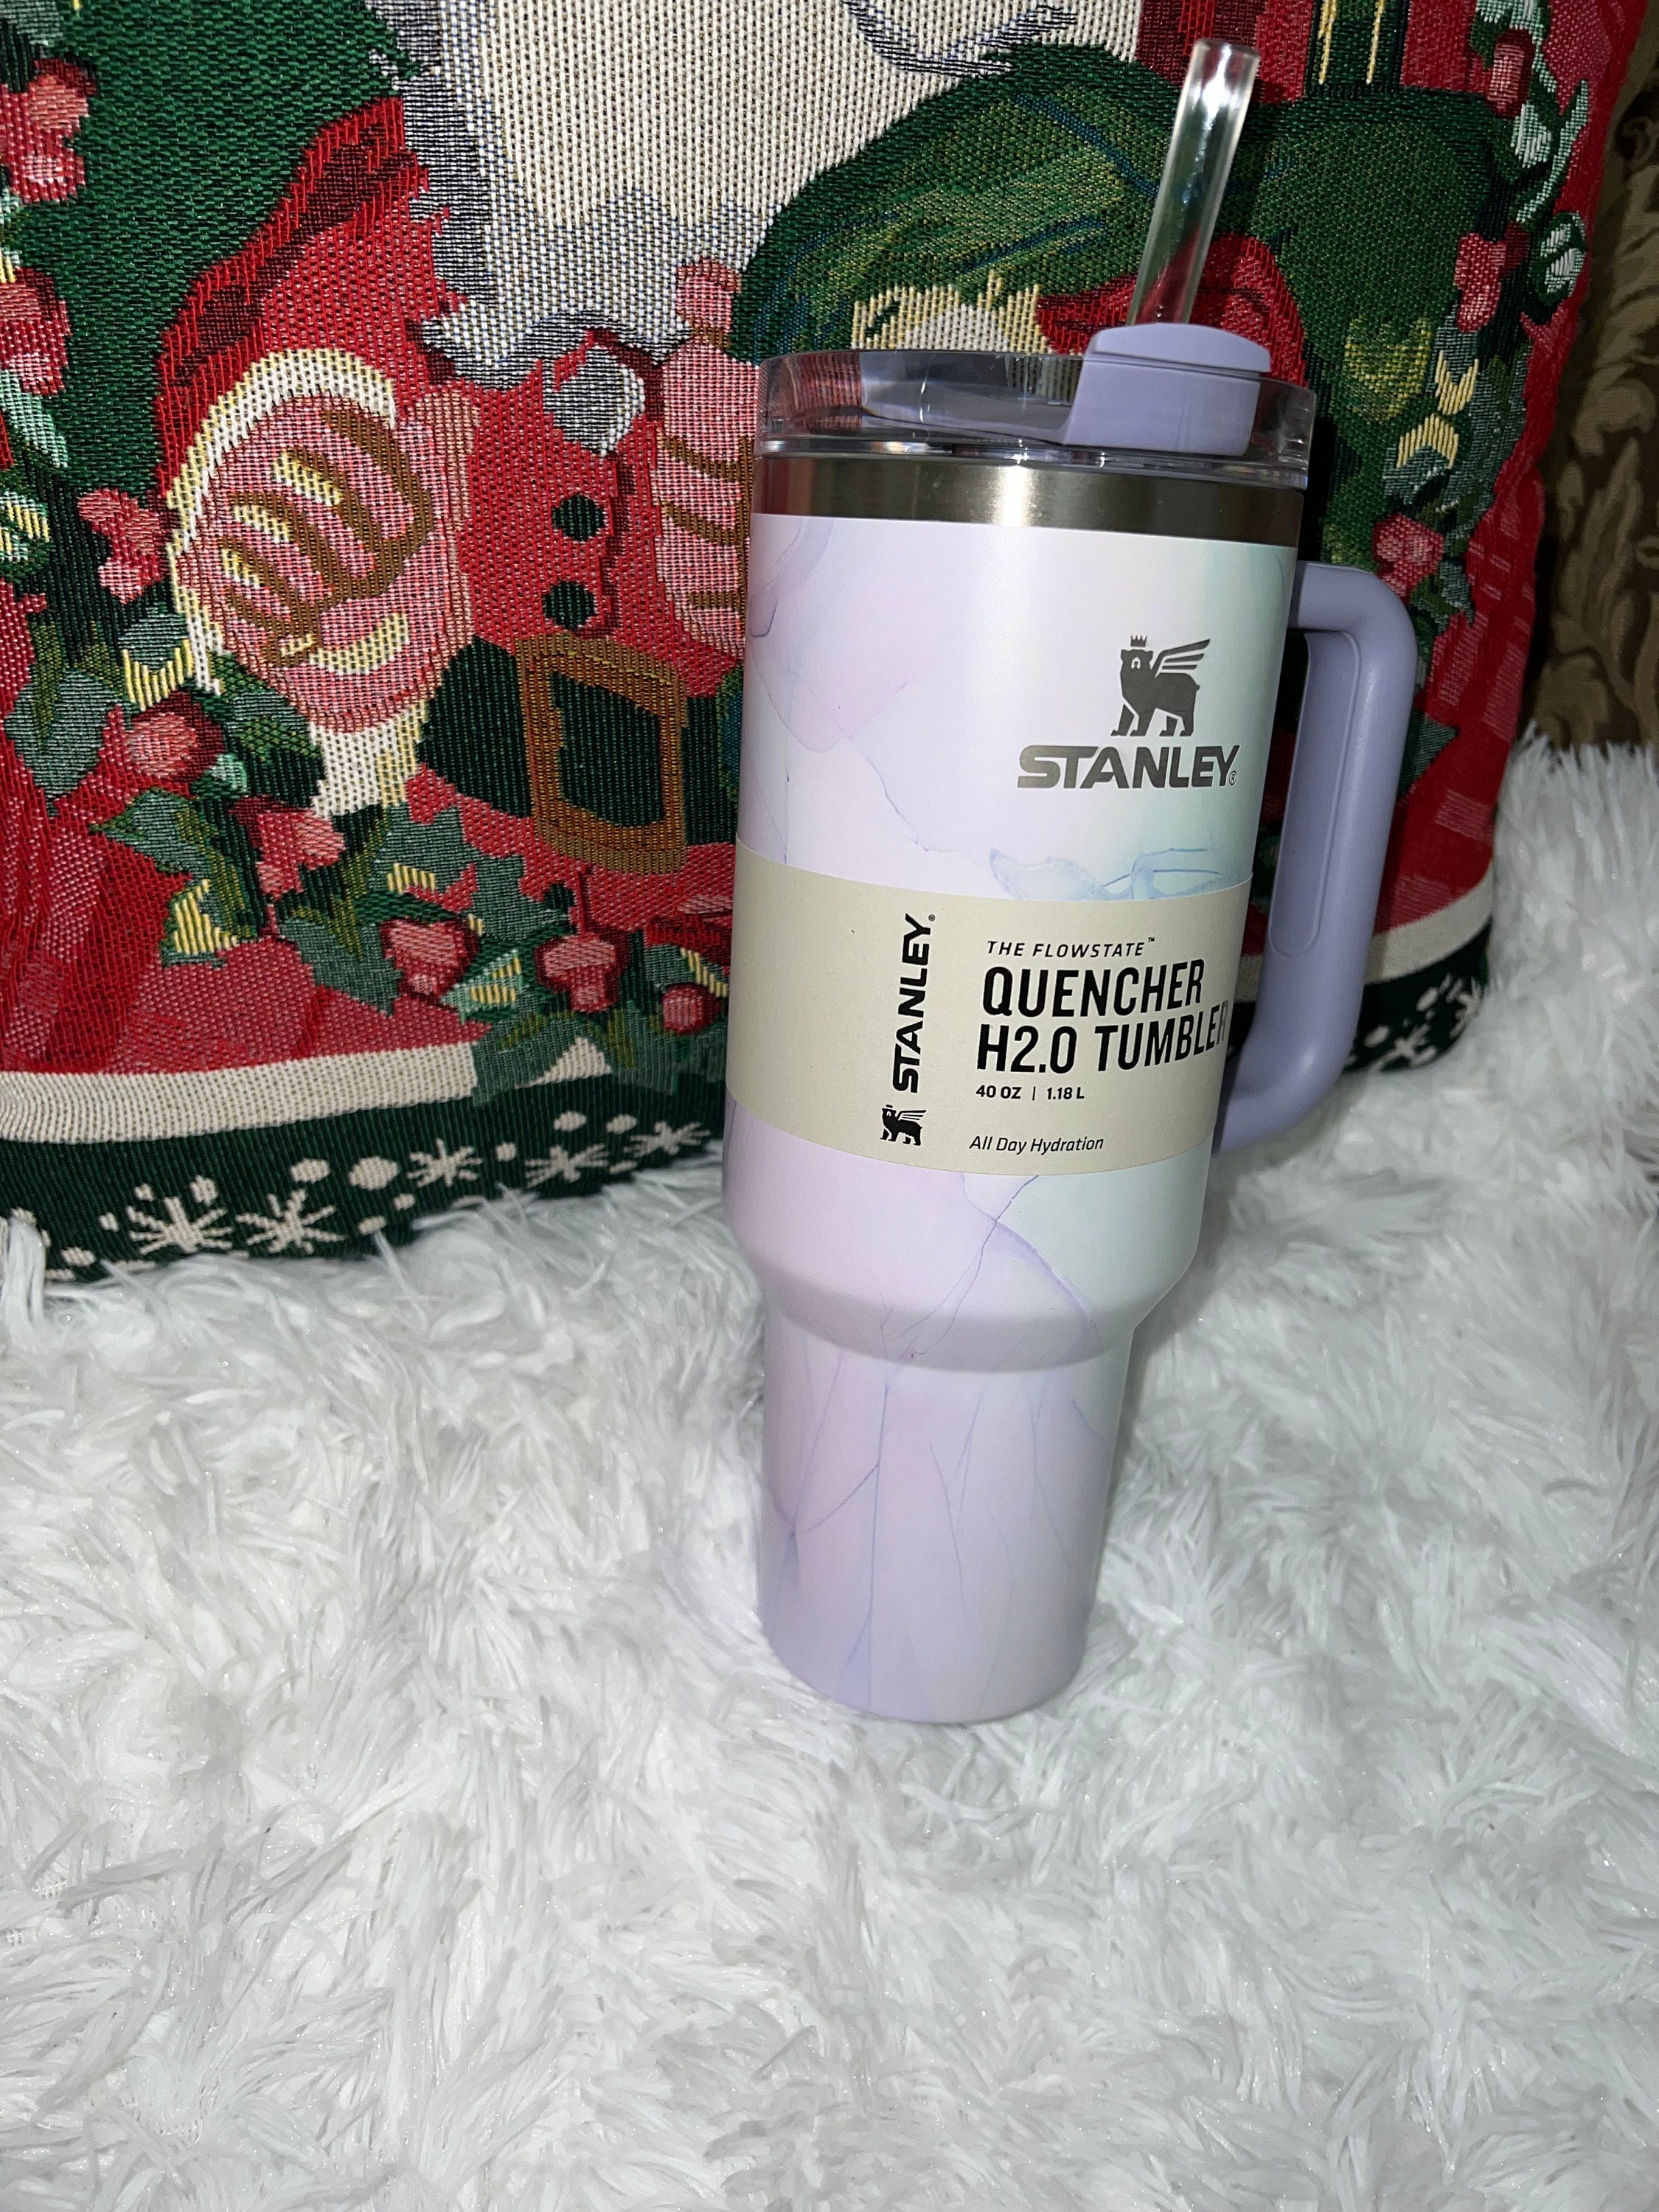 Target Exclusive Stanley 40oz Quencher Wisteria Tie Dye New H2.0 Tumbler  Cup HTF